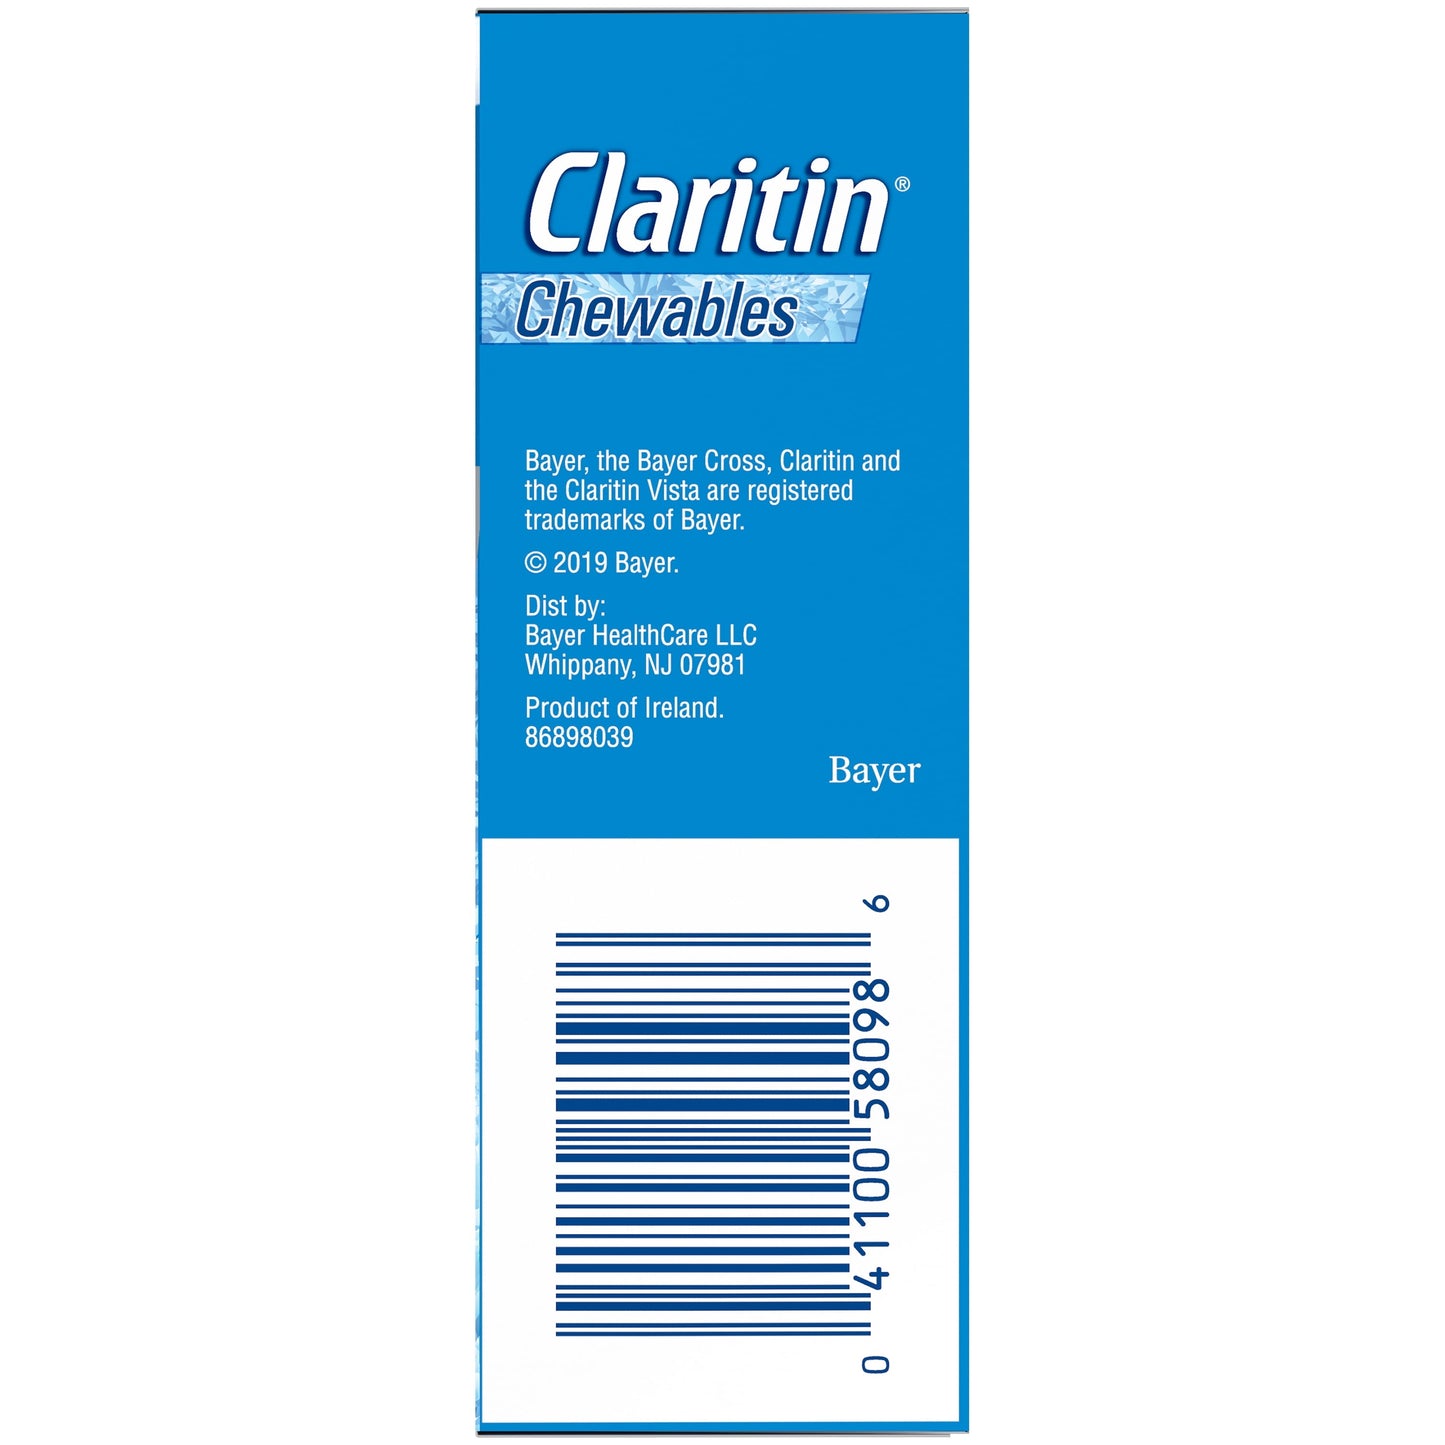 Claritin 24 Hour Non-Drowsy Allergy Medicine, Antihistamine Cool Mint Chewable Tablet, 24 Ct